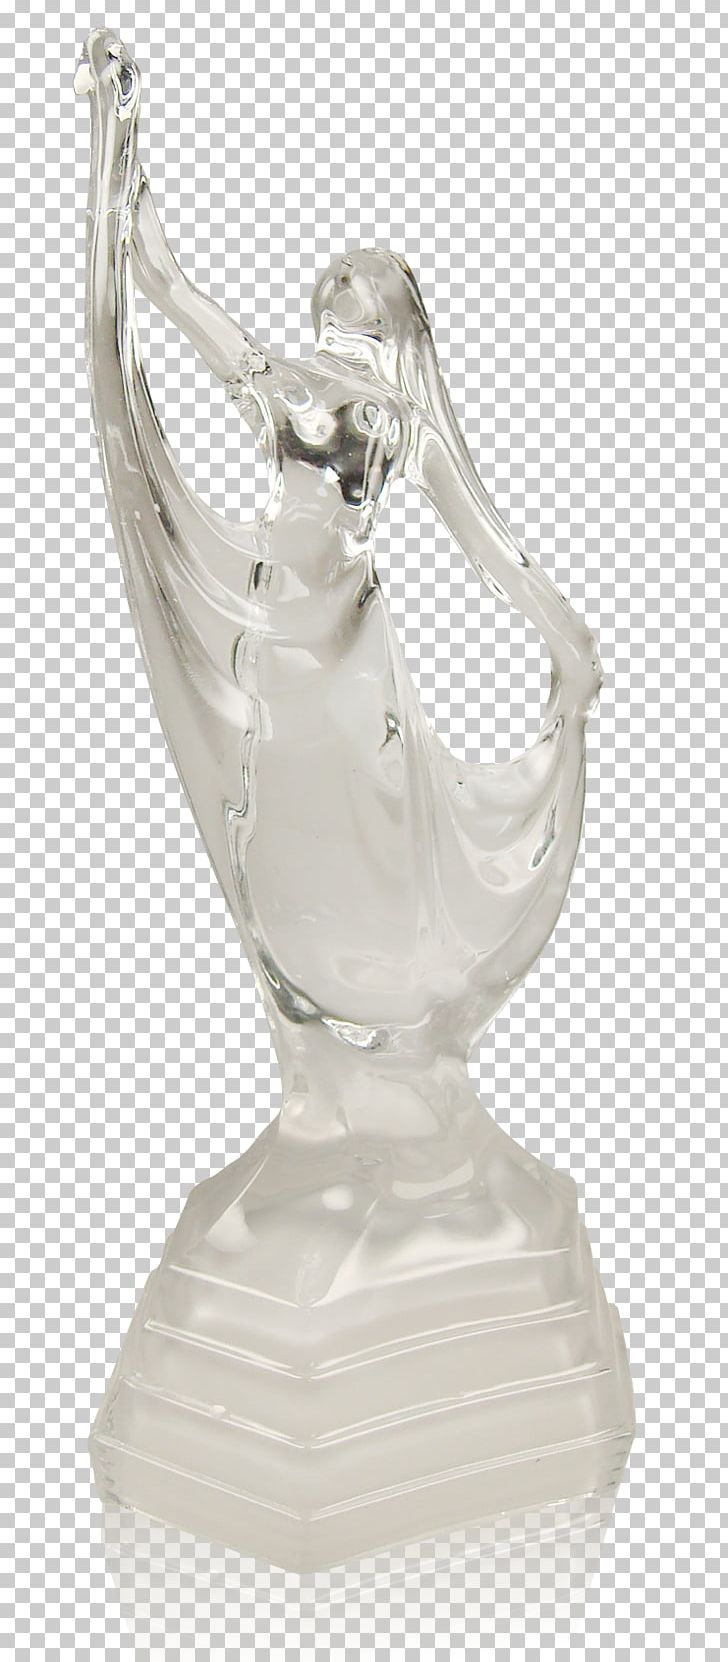 Trophy Figurine Society Awards Glass PNG, Clipart, Award, Ballet Dancer, Classical Sculpture, Crystal, Dance Free PNG Download